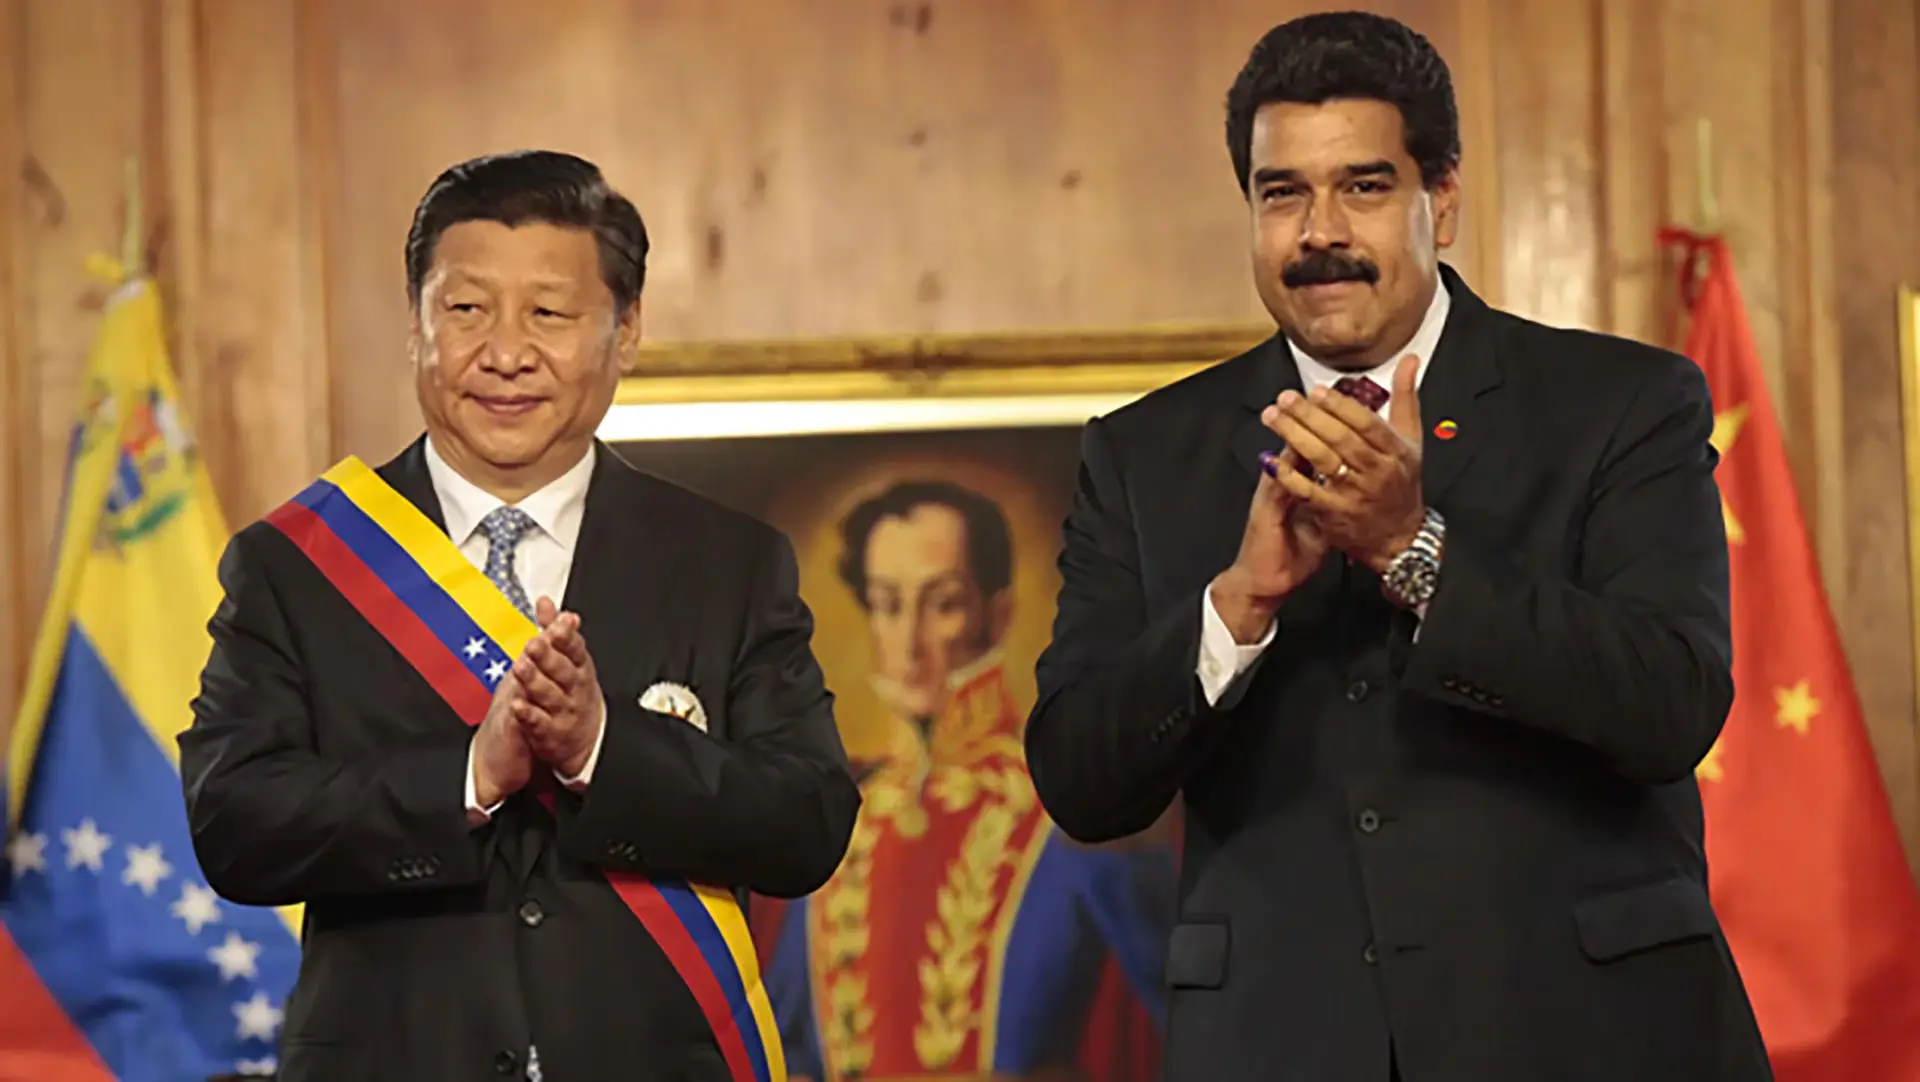 Chinese President Xi Jinping (left) and Venezuelan President Nicolás Maduro (right) during a ceremony at Miraflores Palace in Caracas, during the official visit of the Chinese president in 2017. Photo: Presidential Press/File photo.